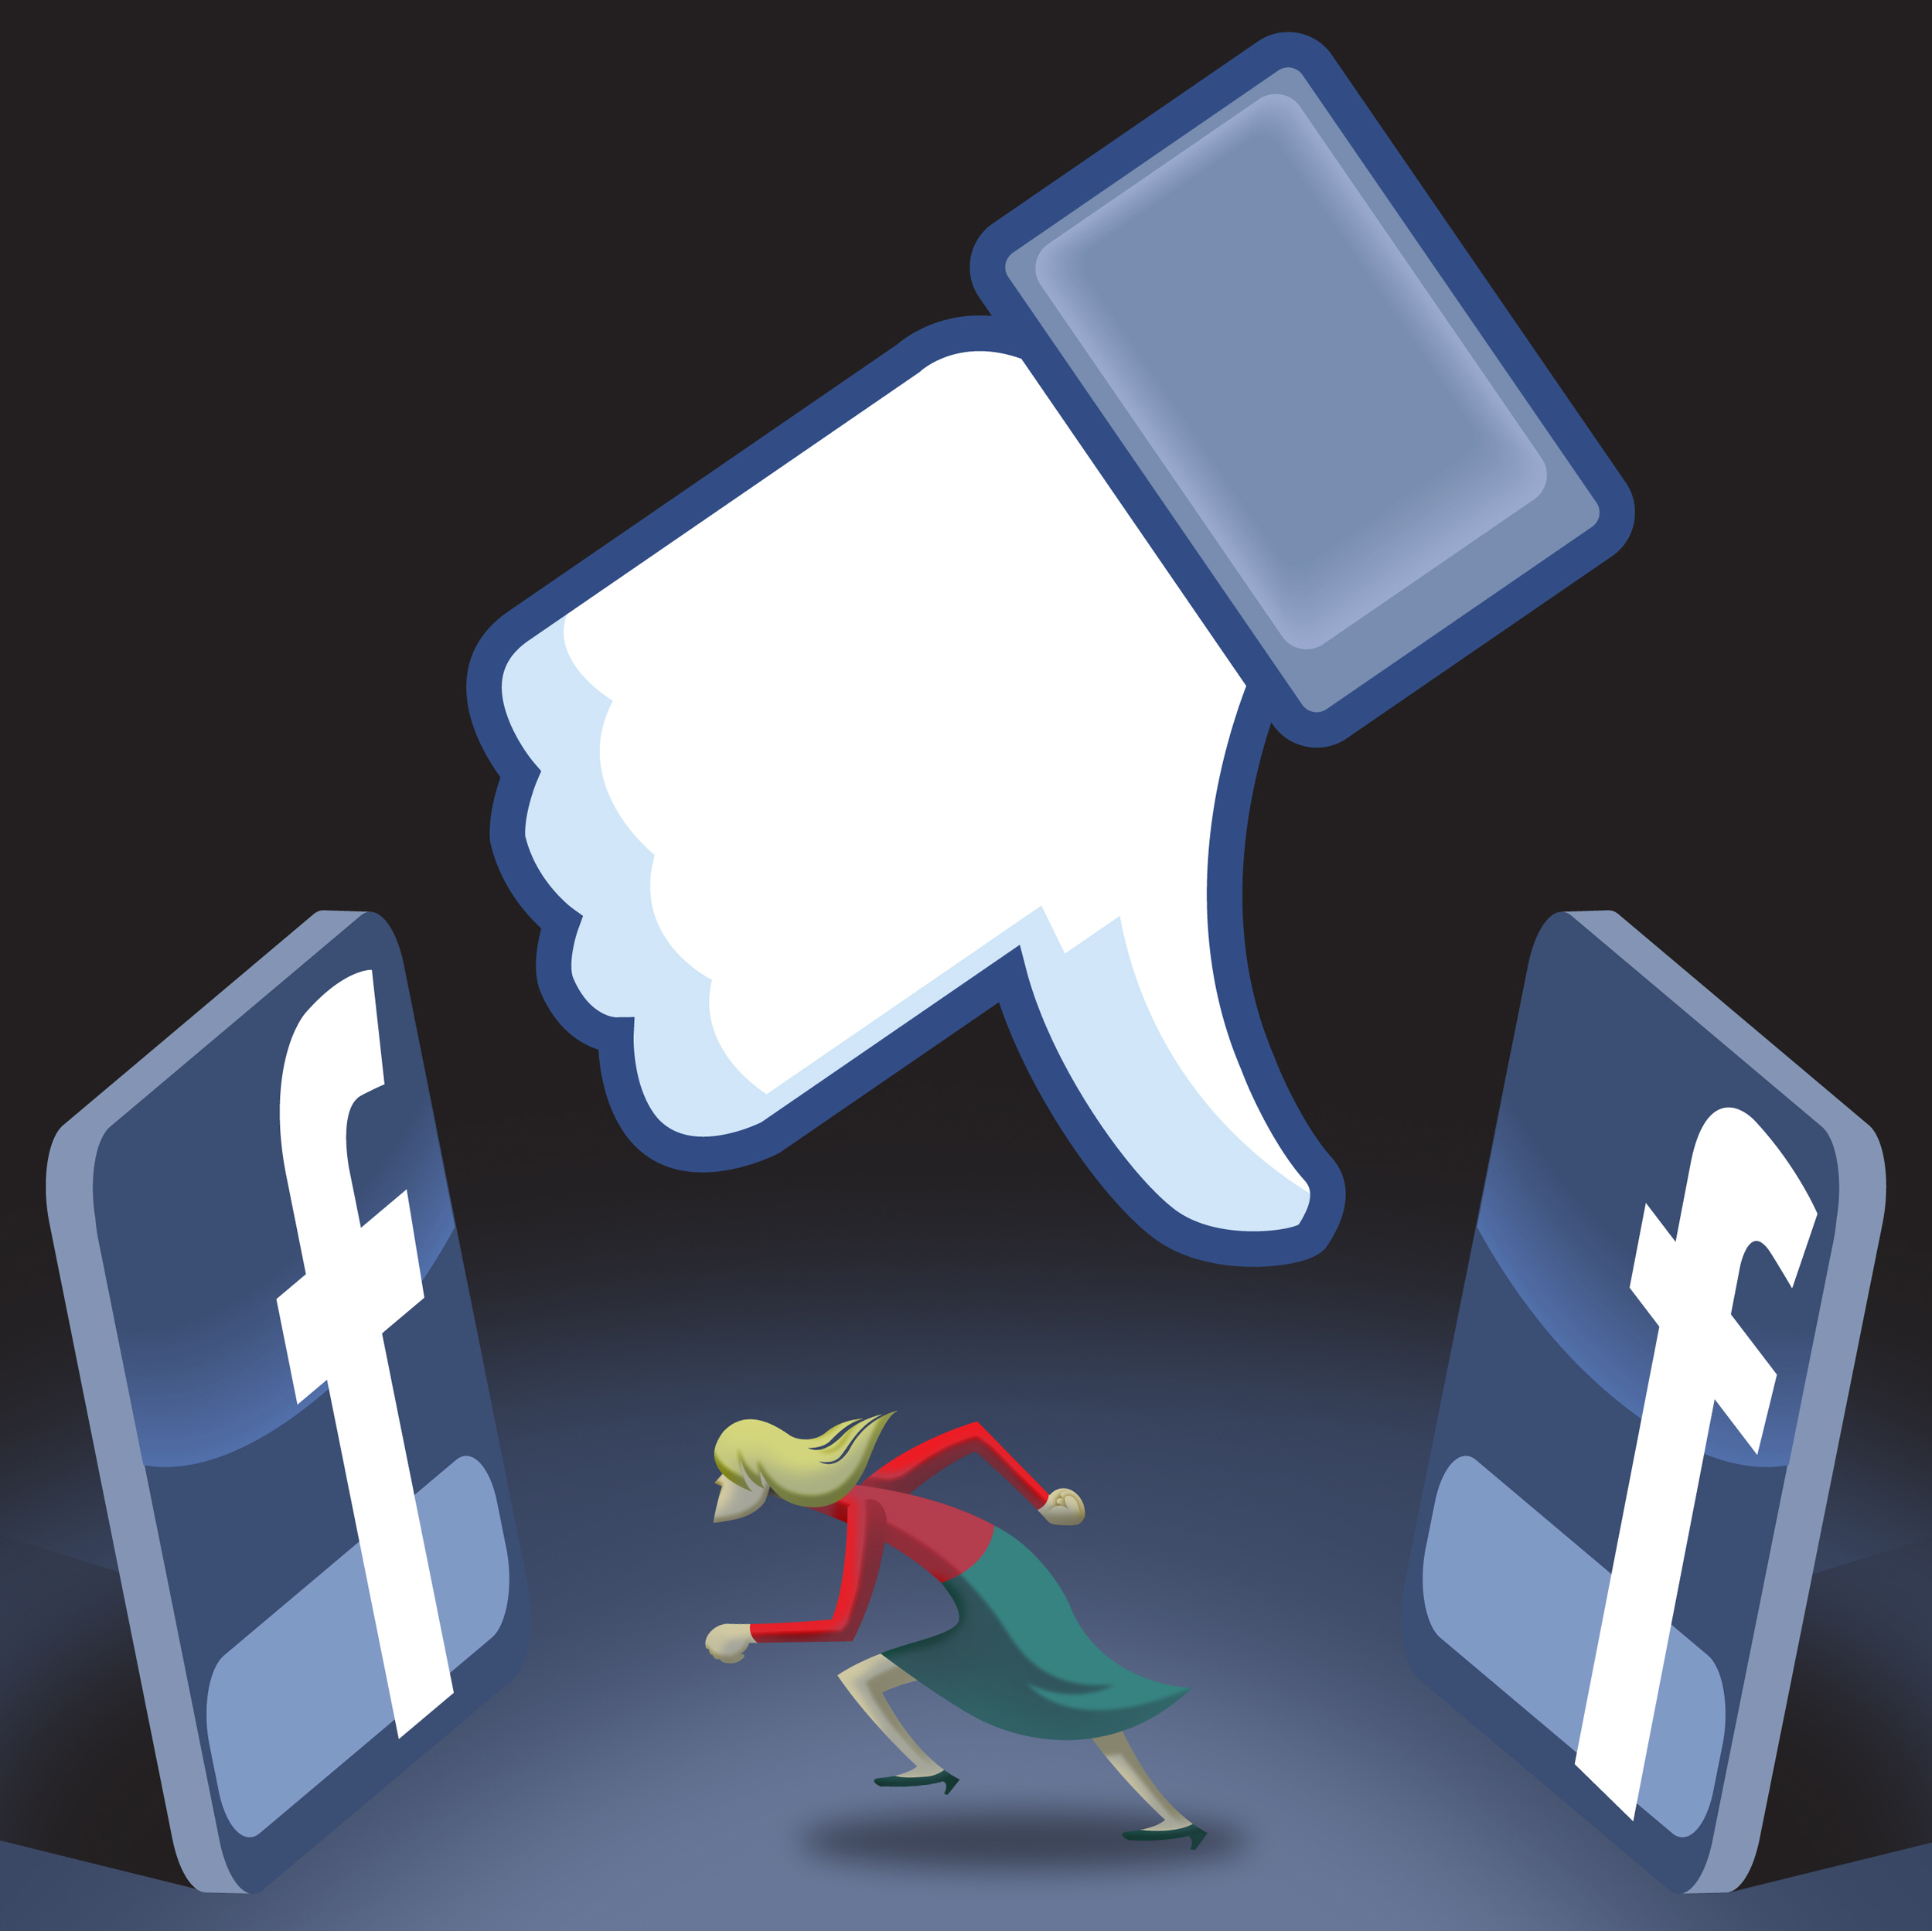 Illustration of a blond woman running to the left between two letter "Fs" in the style of Facebook. A thumbs-down Facebook icon is above the woman.